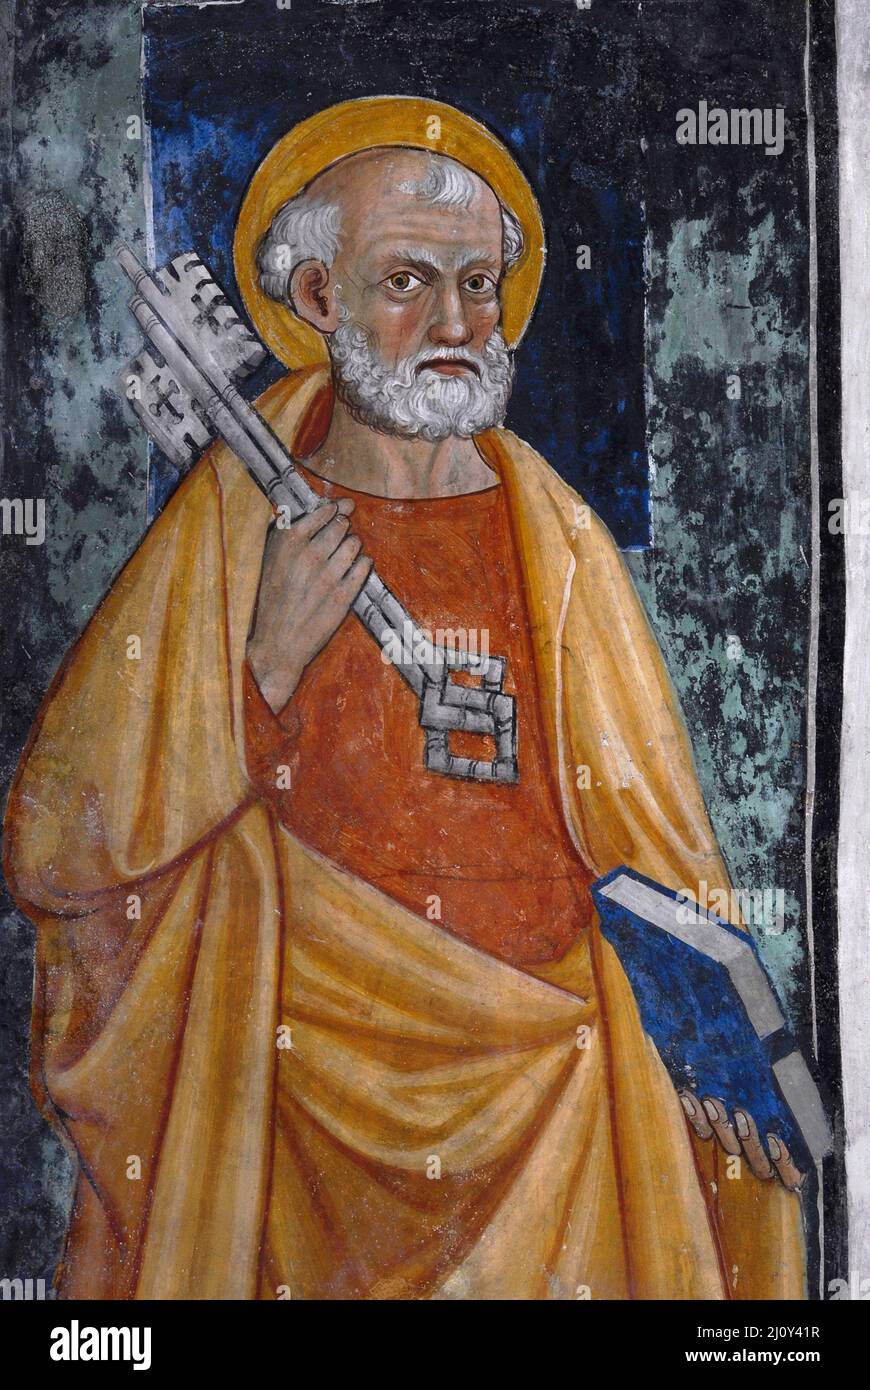 White-haired St Peter holds the keys to the Kingdom of Heaven in 1400s Piedmontese Late Gothic fresco cycle.  Immediately below quadripartite ceiling vault in the church of the former Franciscan convent of San Francesco at Susa, Piedmont, Italy. Stock Photo